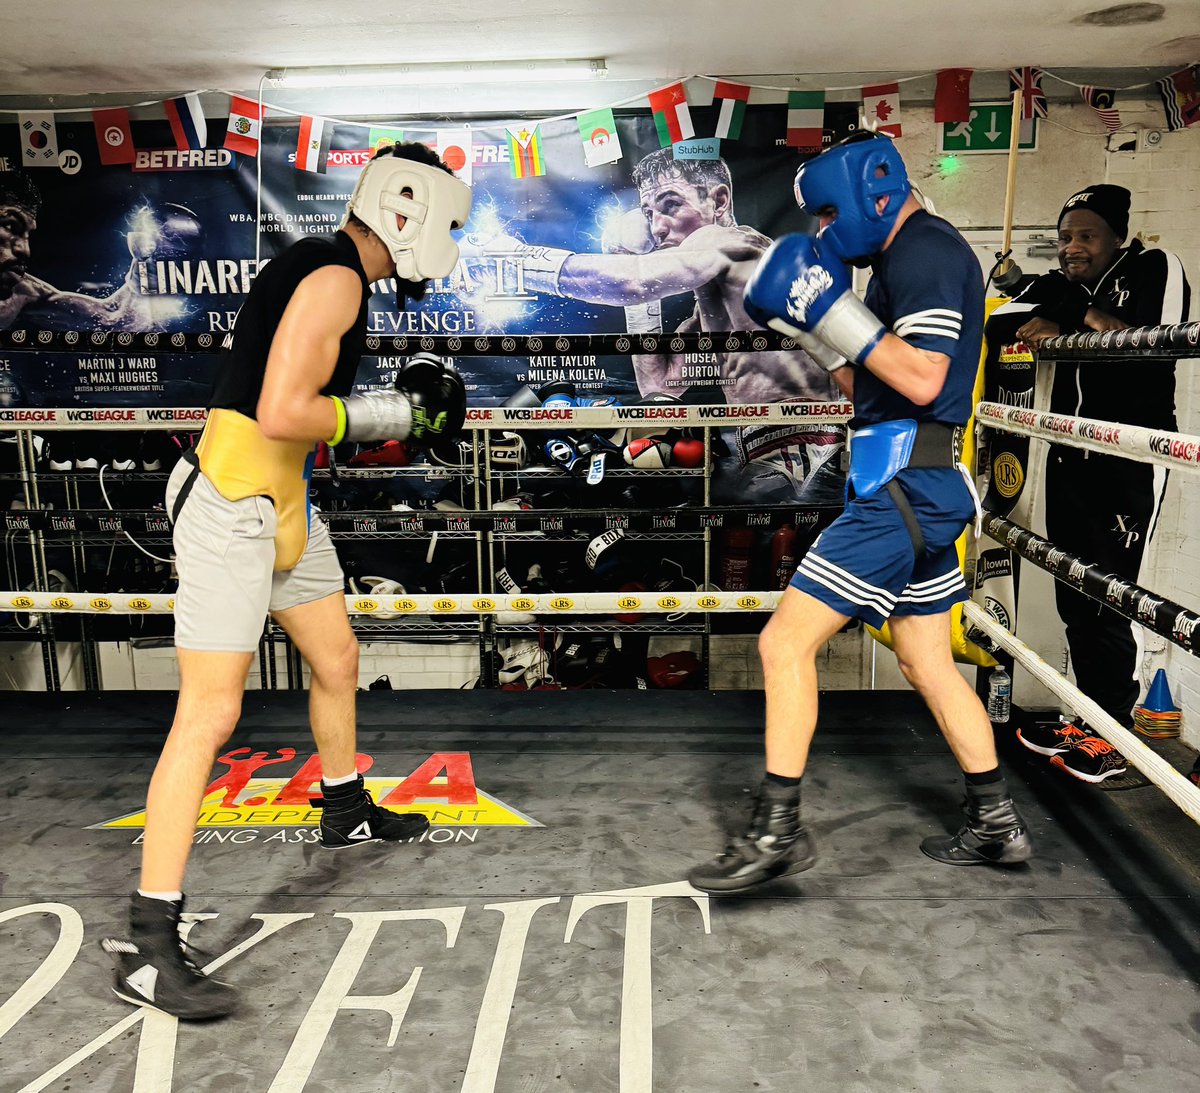 A really good 8 rounds sparring yesterday for @Ahmed_NM_Hatim with Marley Mason under the watchful eye of trainer Xavier Miller. Just over a couple of weeks before he steps into the ring to continue his rise towards title contention in the lightweight division. @Streetwisemgt